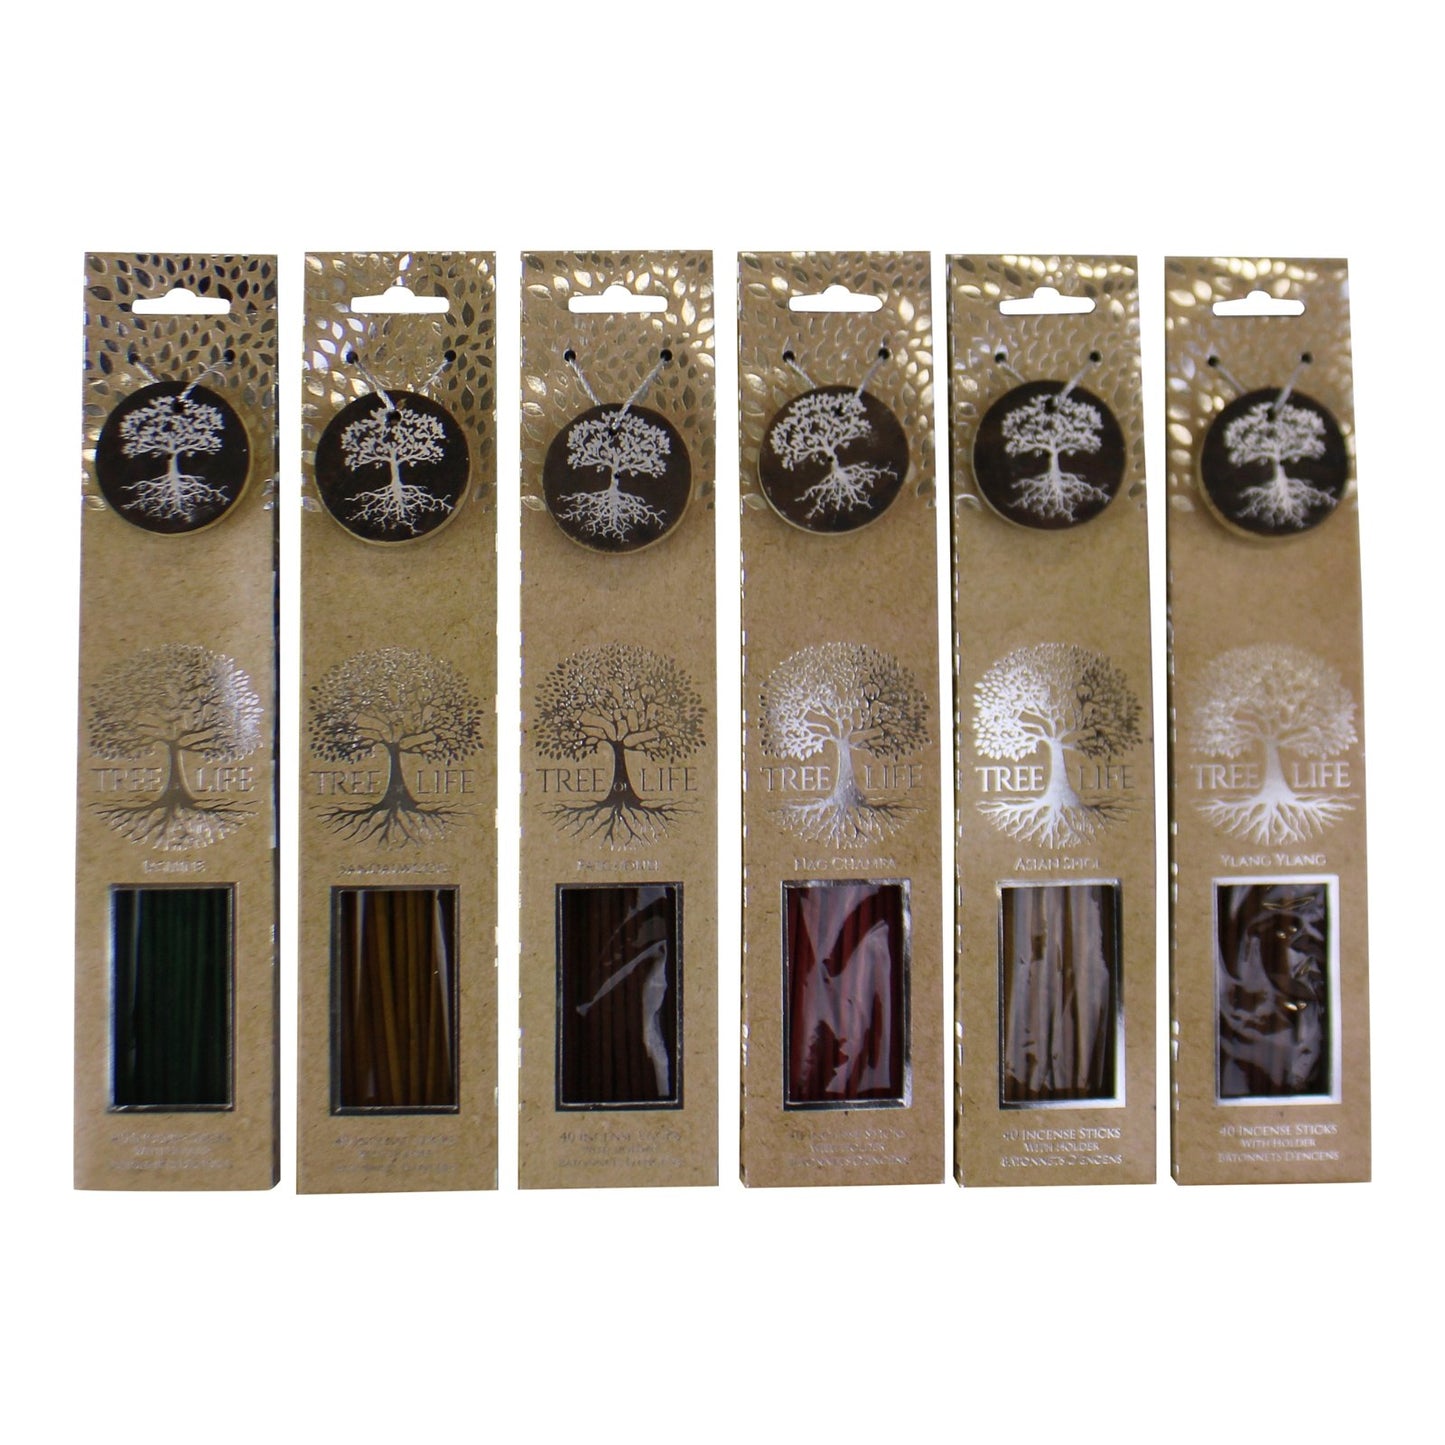 Set of 6 Fragranced Incense Sticks With Holders, Tree Of Life Design